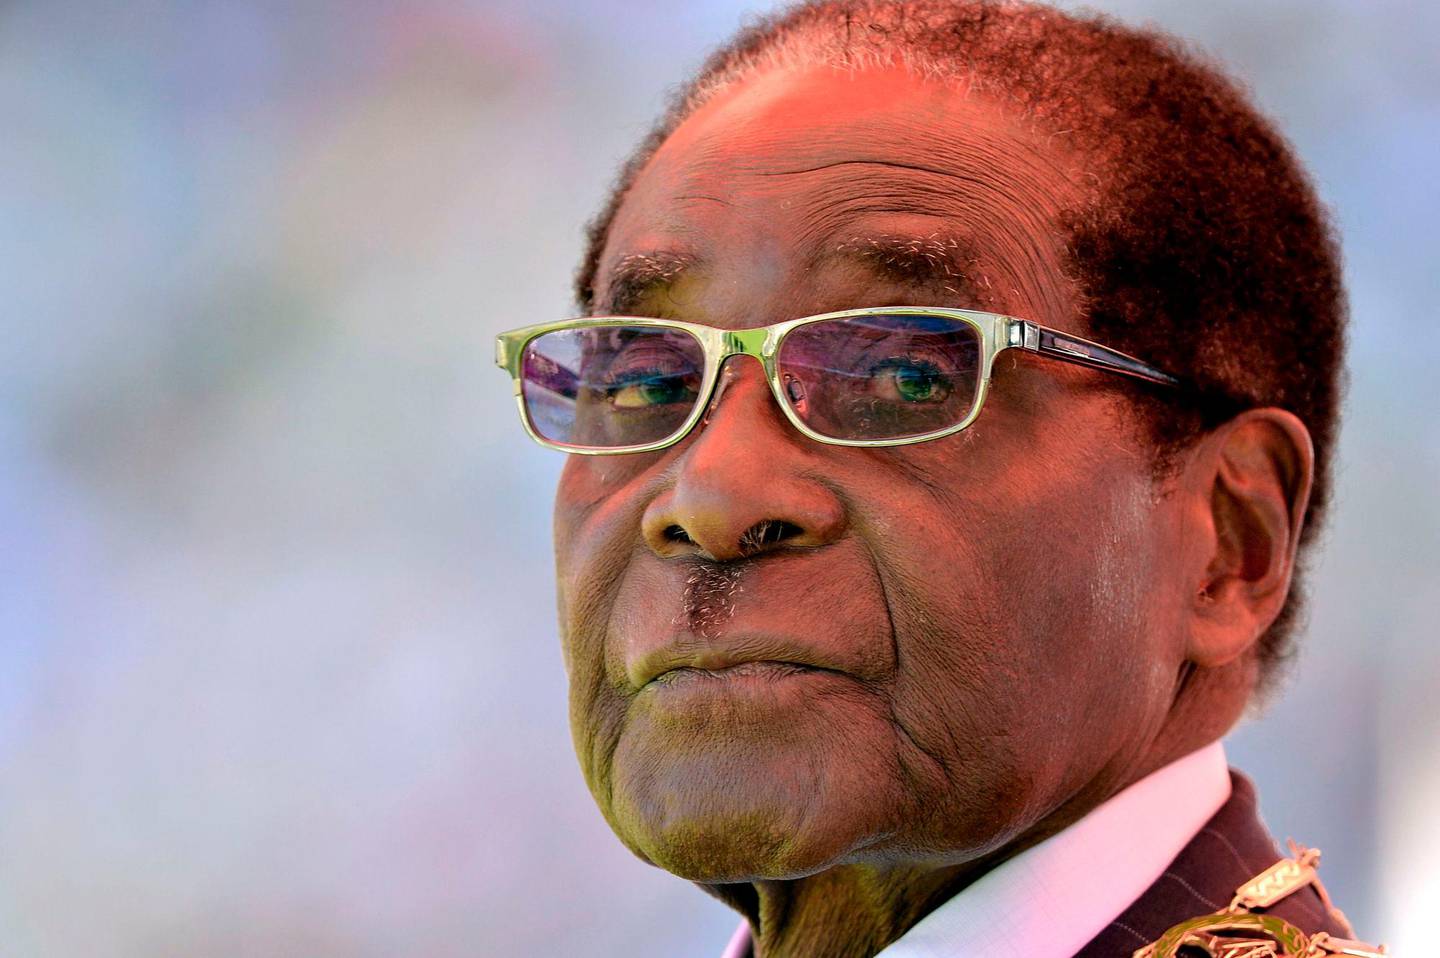 (FILES) This file photo taken on August 22, 2013 shows then Zimbabwean President Robert Mugabe looking on during his inauguration and swearing-in ceremony at the 60,000-seater sports stadium in Harare.  
Zimbabwe's former president Robert Mugabe, 93, who was ousted from power last month, has flown to Singapore for a medical check-up, his former spokesman said on December 14, 2017. Mugabe and his wife Grace have not been seen in public since he was forced to resign after a military takeover brought a sudden end to his authoritarian 37-year reign.
 / AFP PHOTO / ALEXANDER JOE